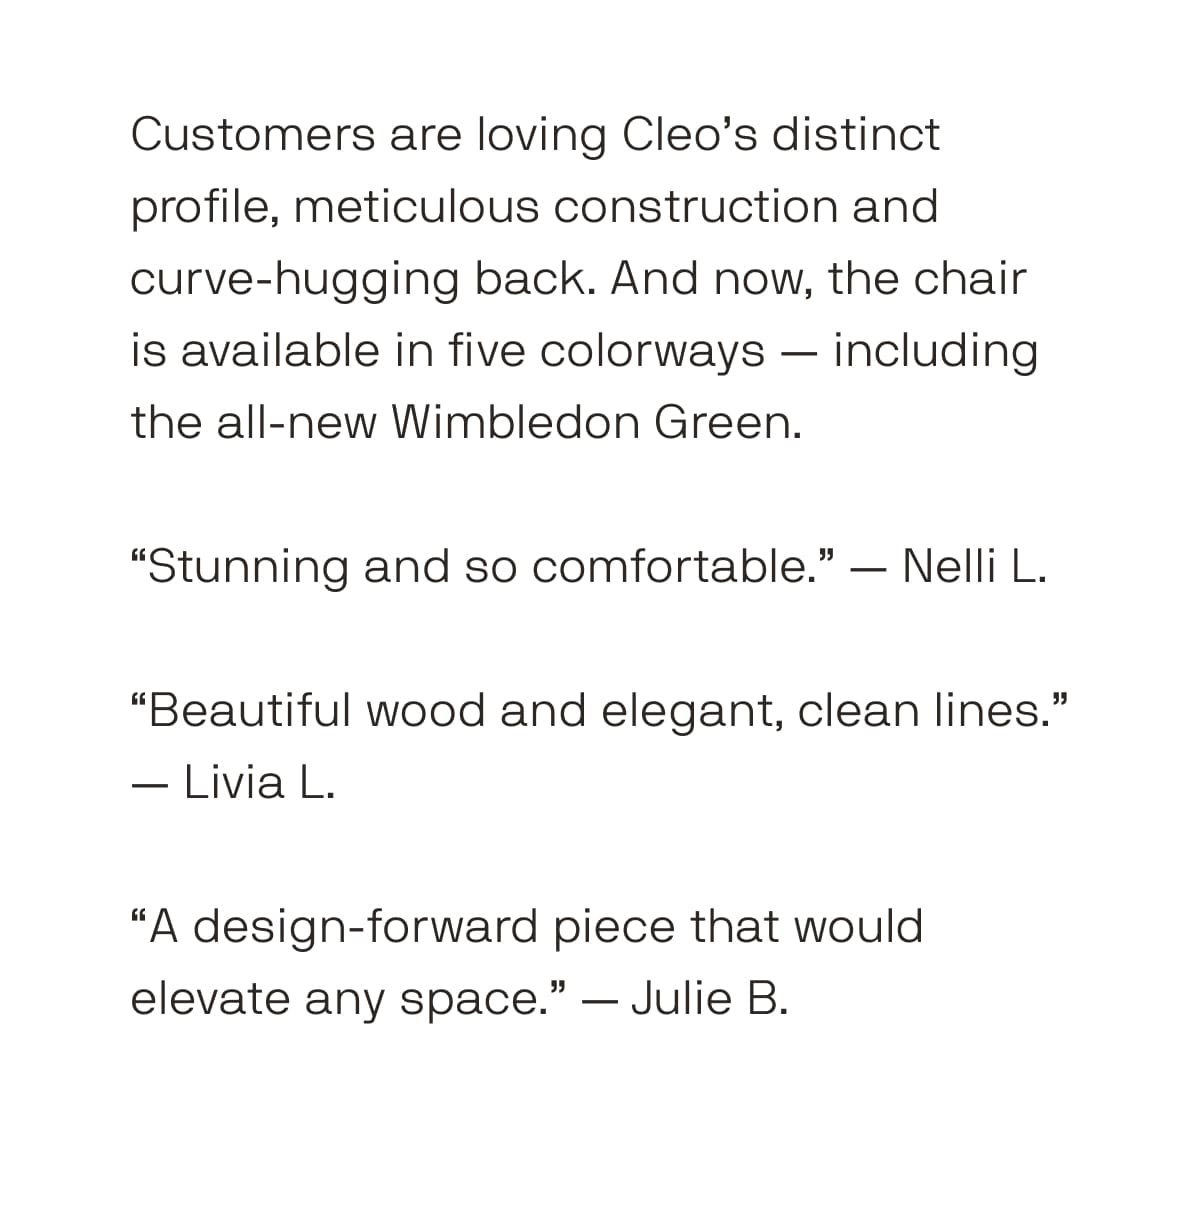 Reviews of the Cleo Chair by Dims.